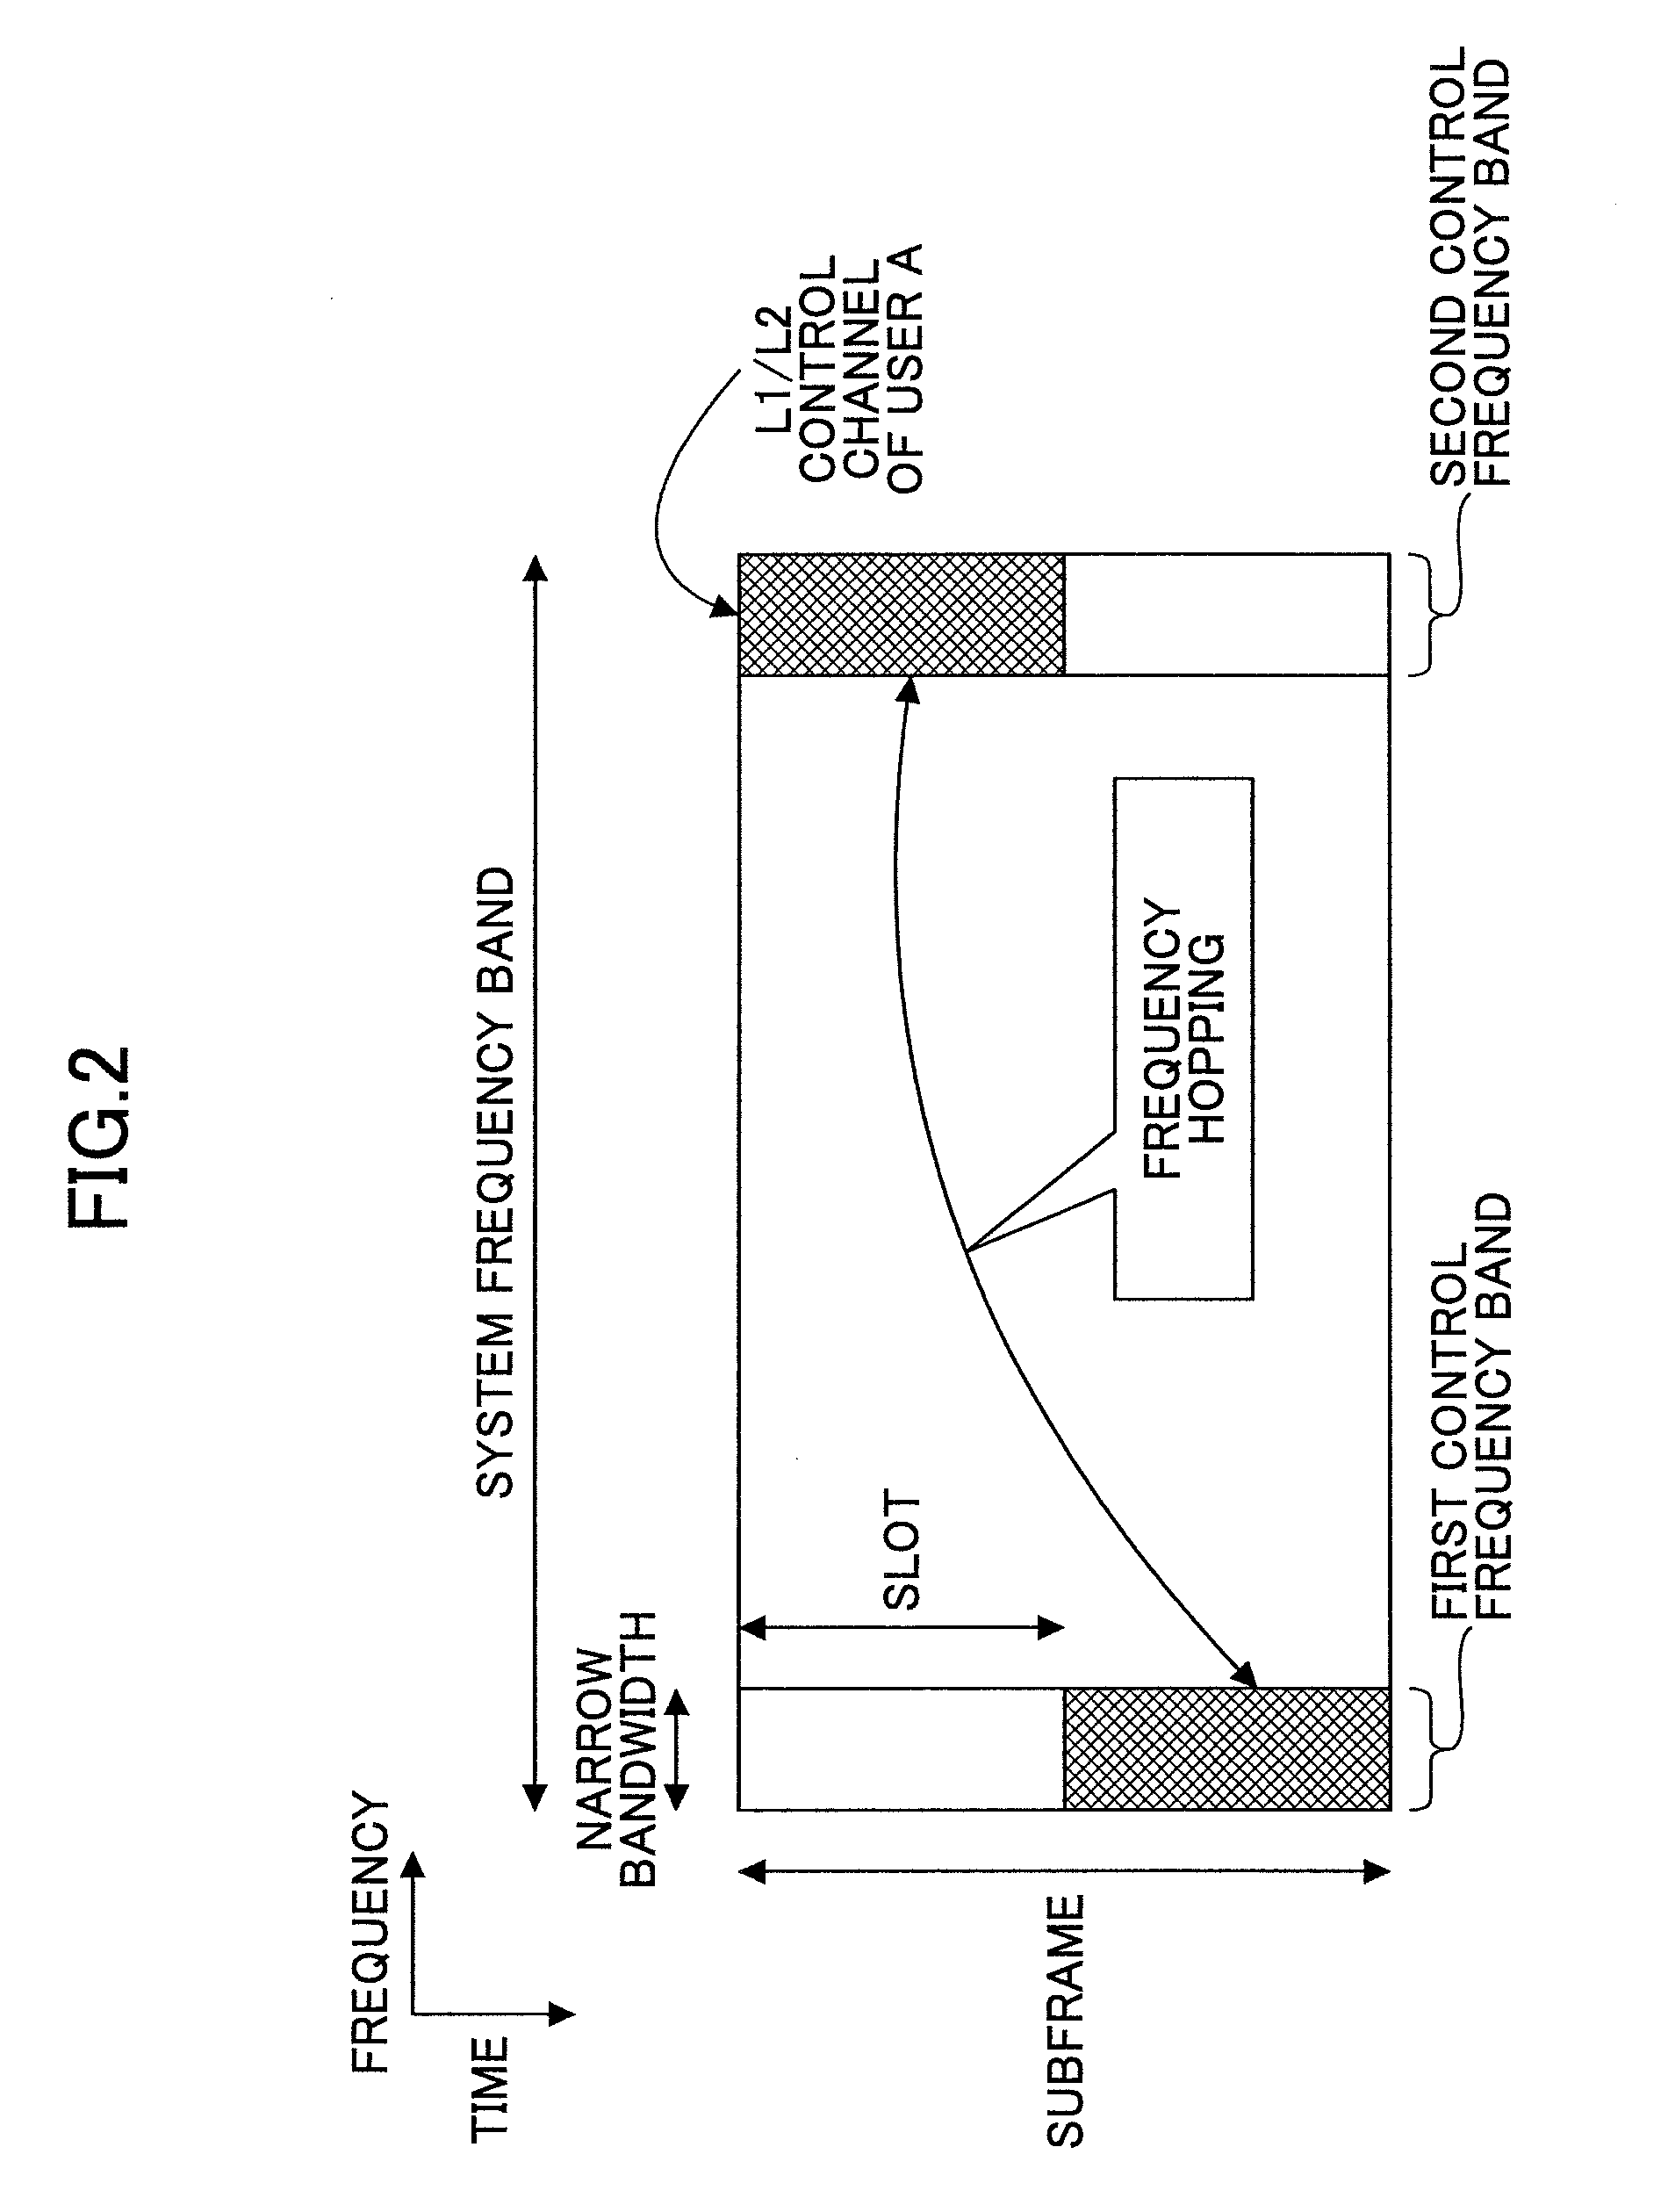 Mobile communication system, transmitting device, receiving device, and method